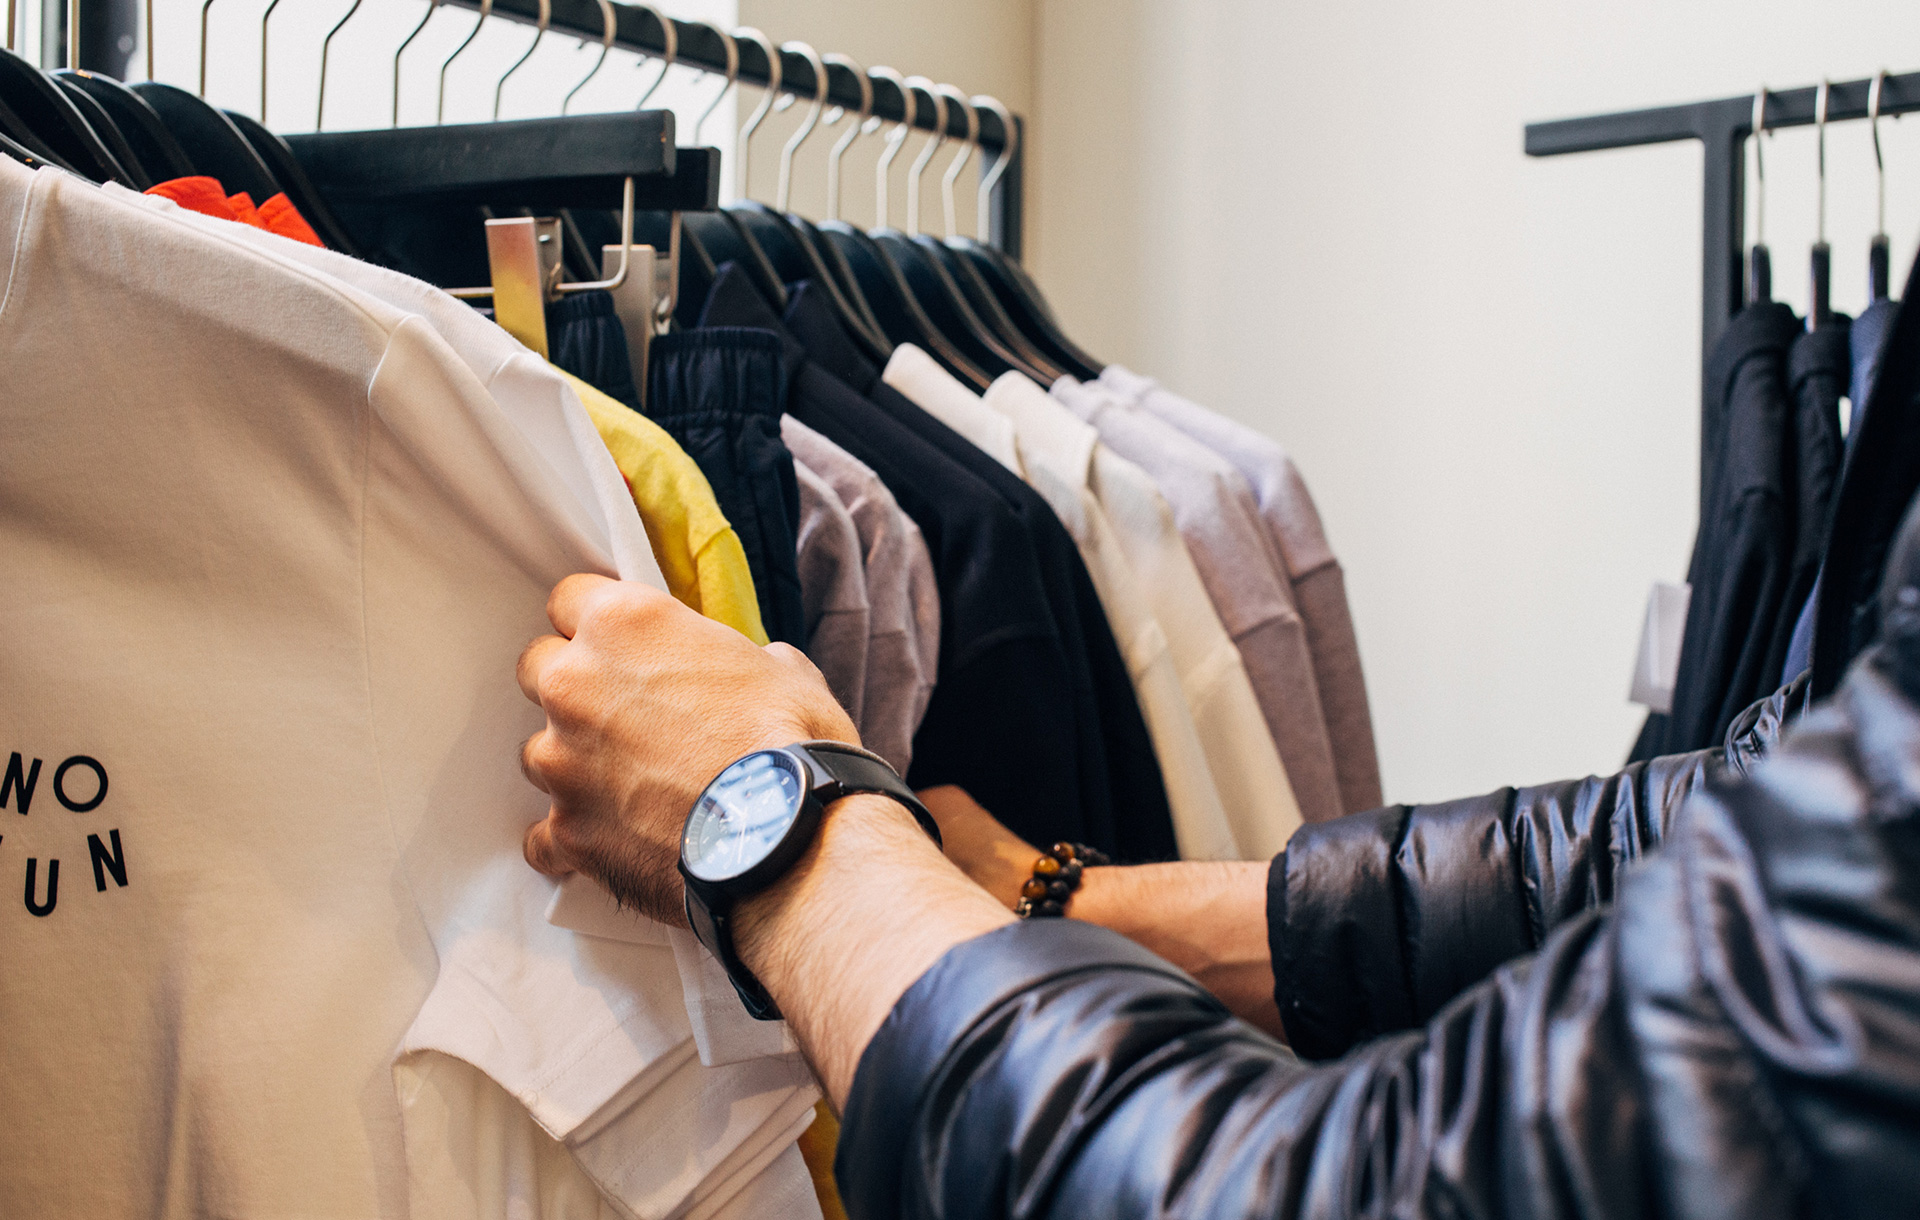 Menswear eCommerce: how to capitalise on the fashion-unconscious?